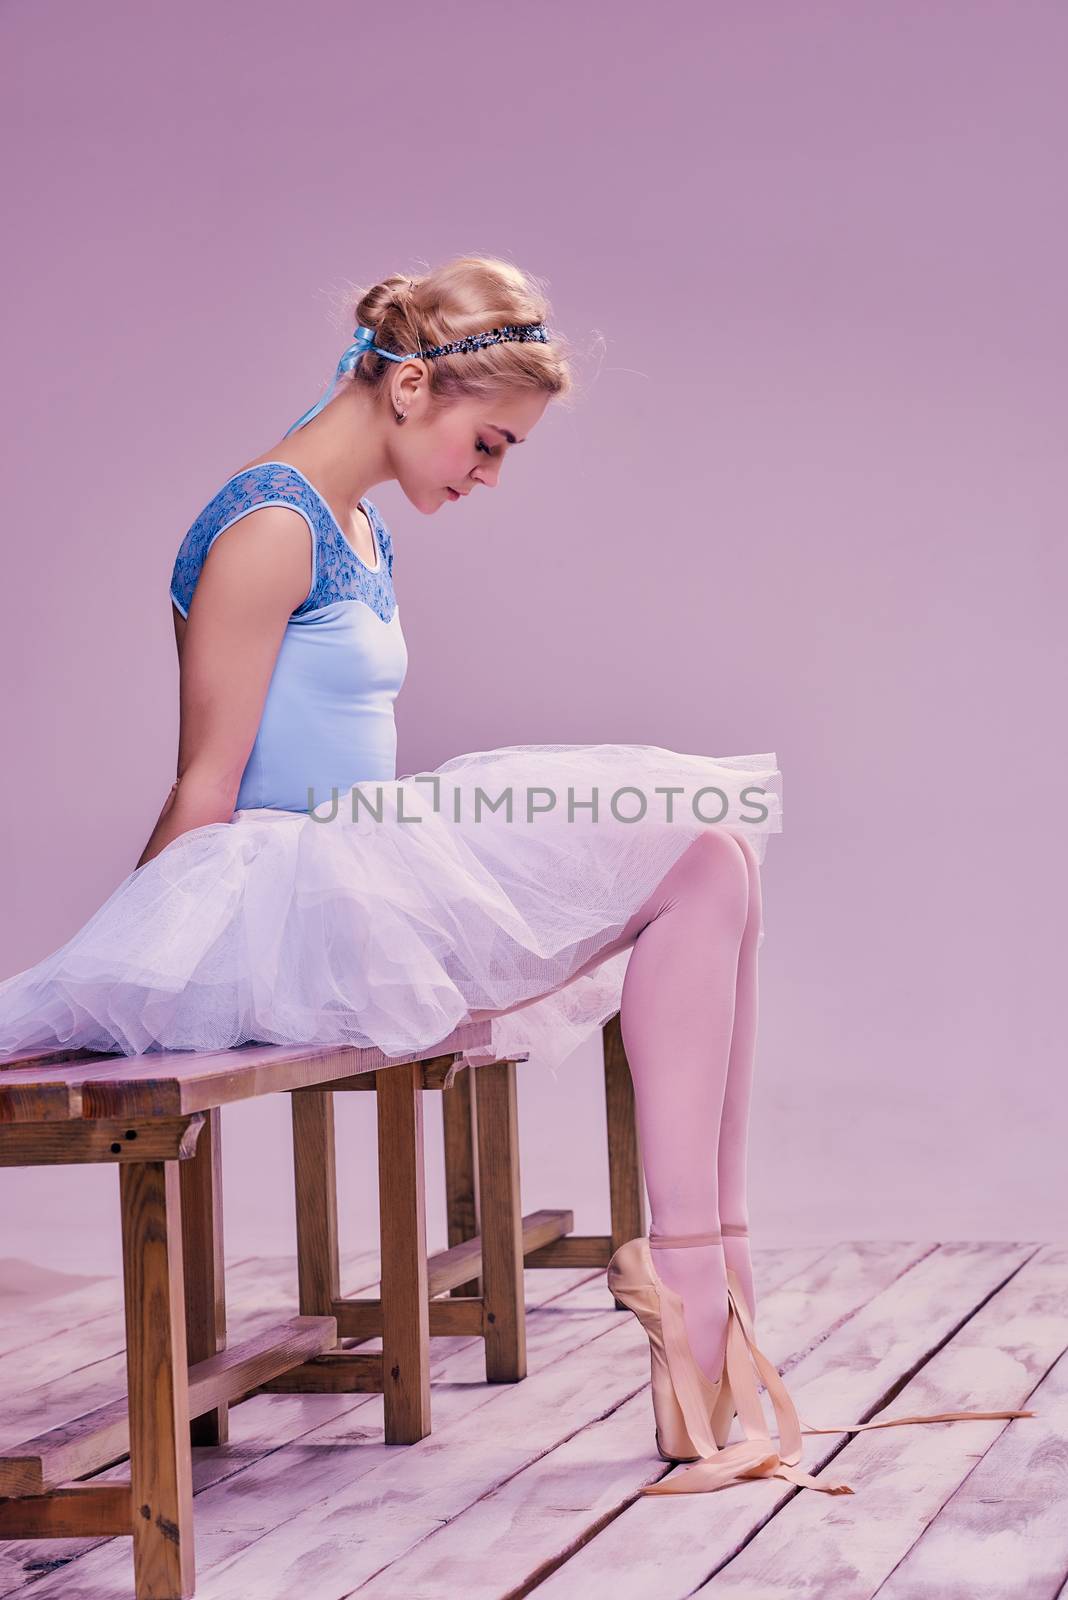 Tired ballet dancer sitting on the wooden floor on a pink background